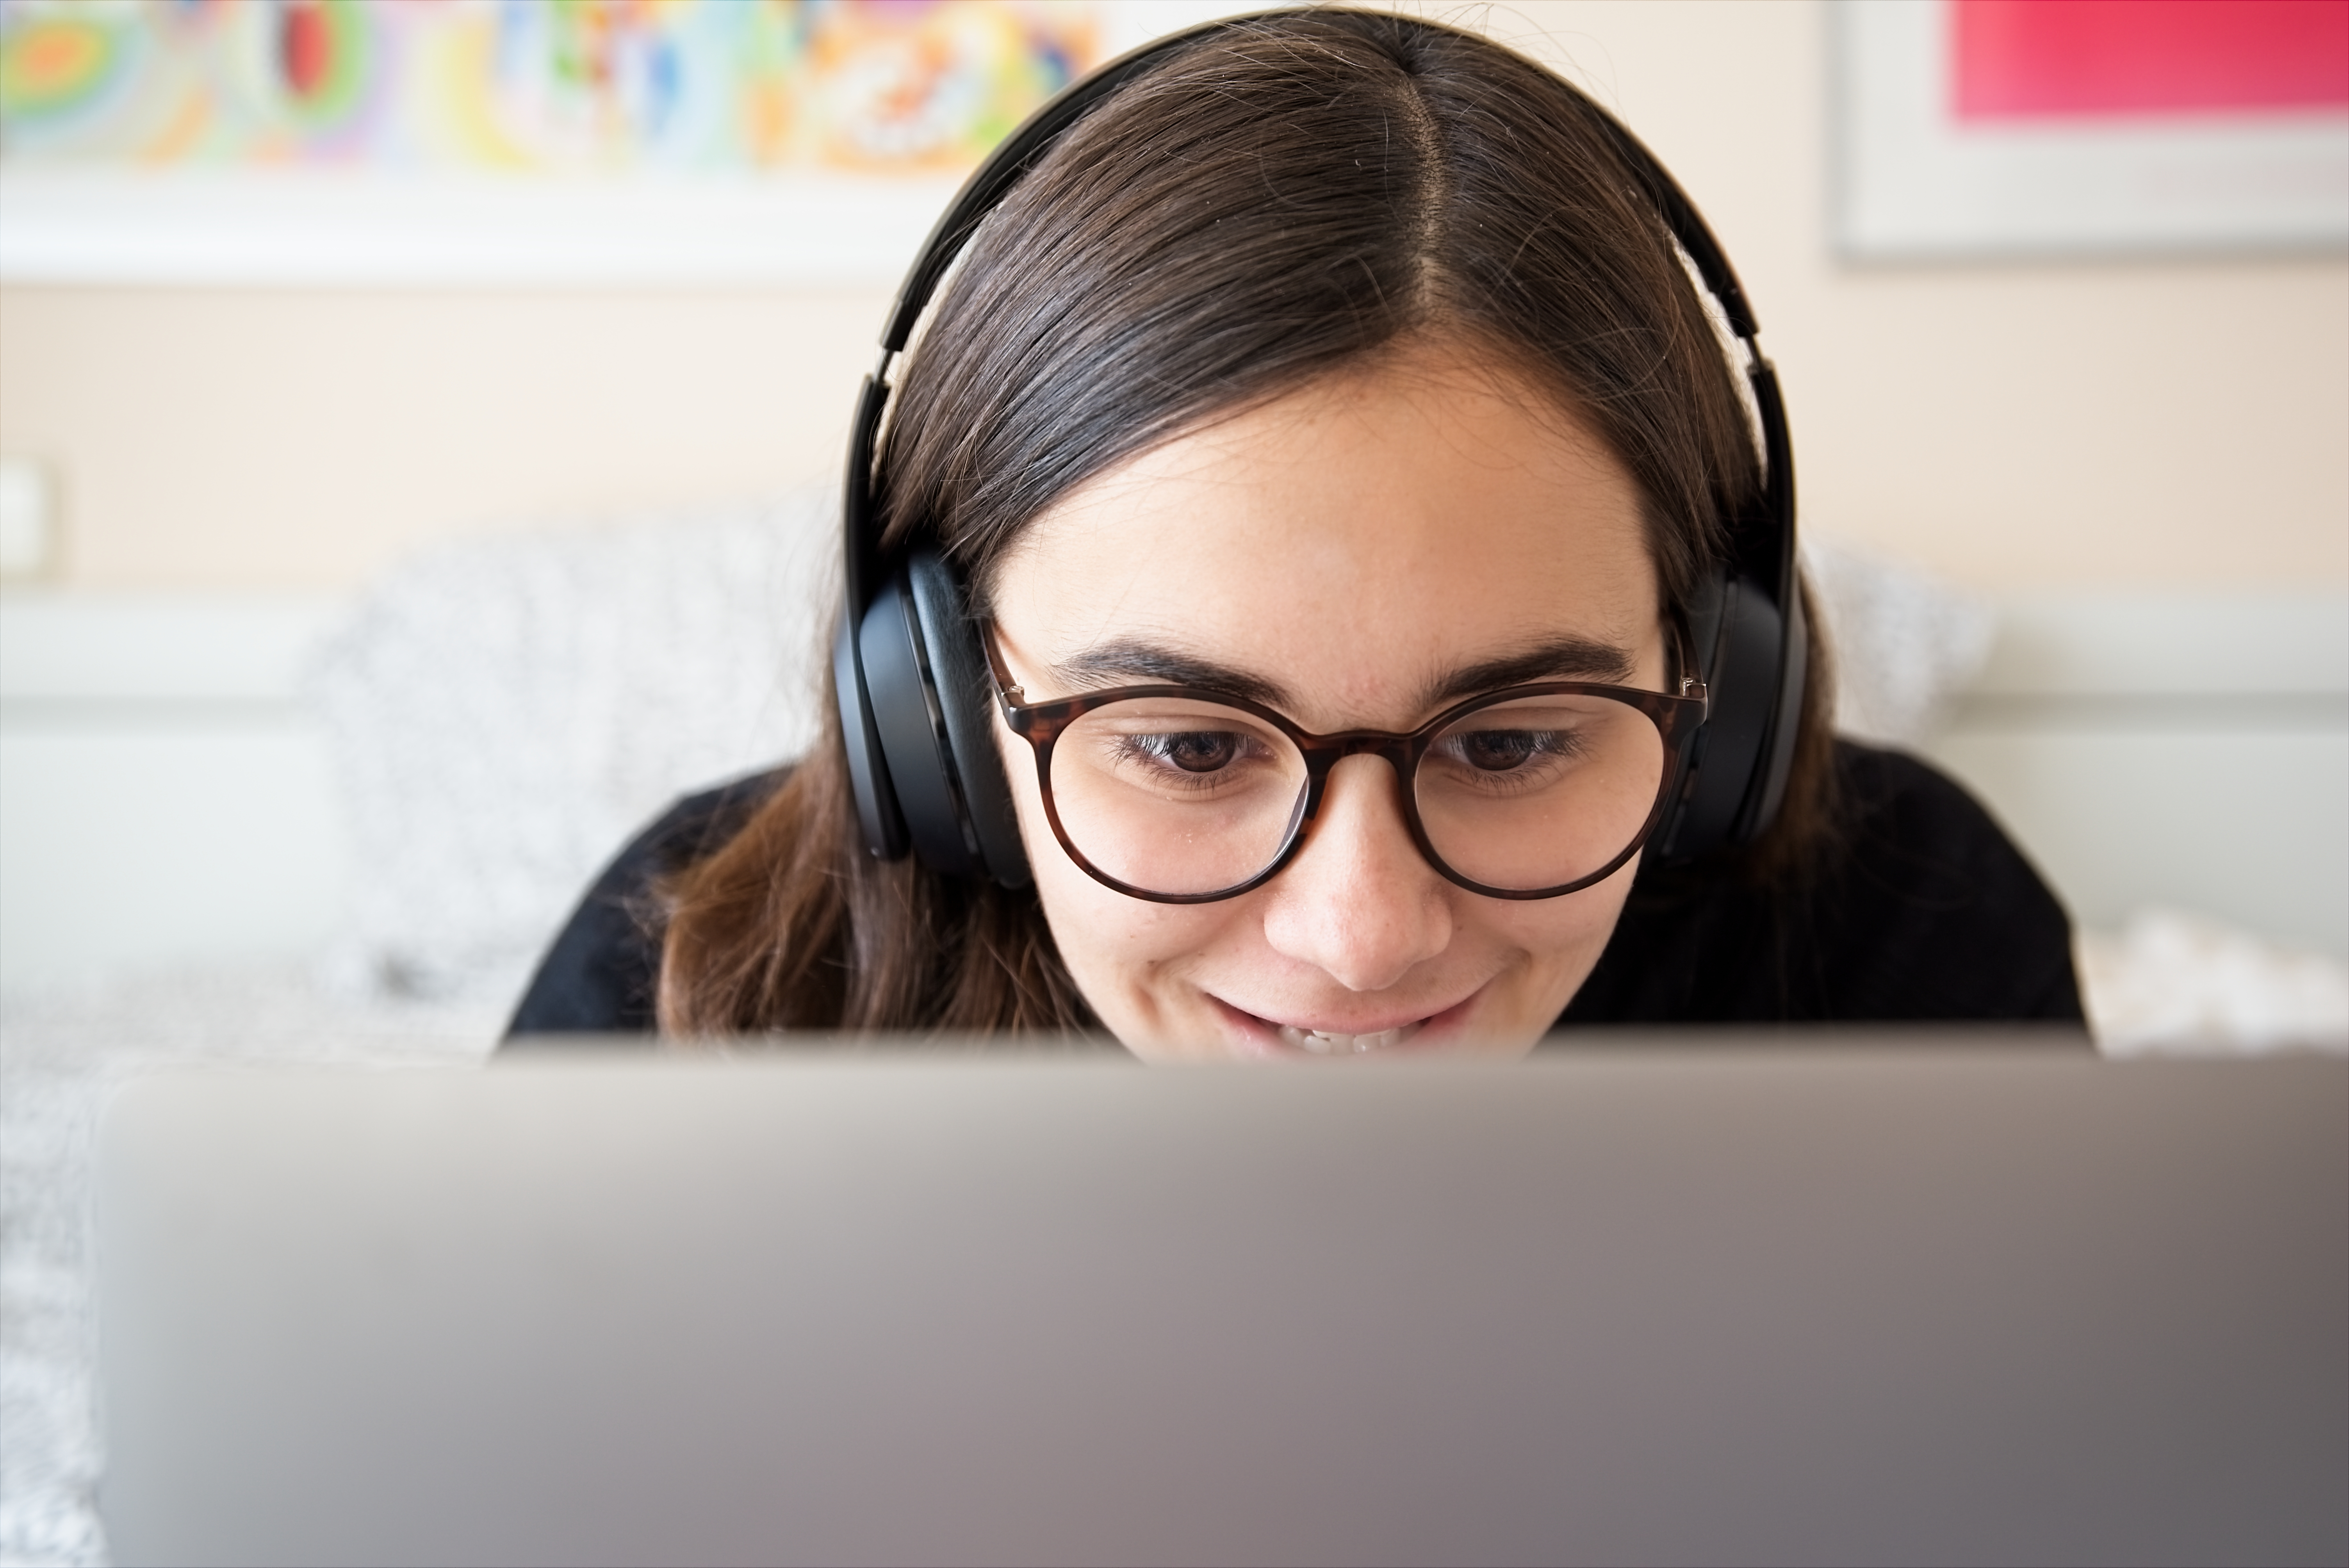 A woman wearing glasses and headphones staring at a computer screen in front of them while smiling